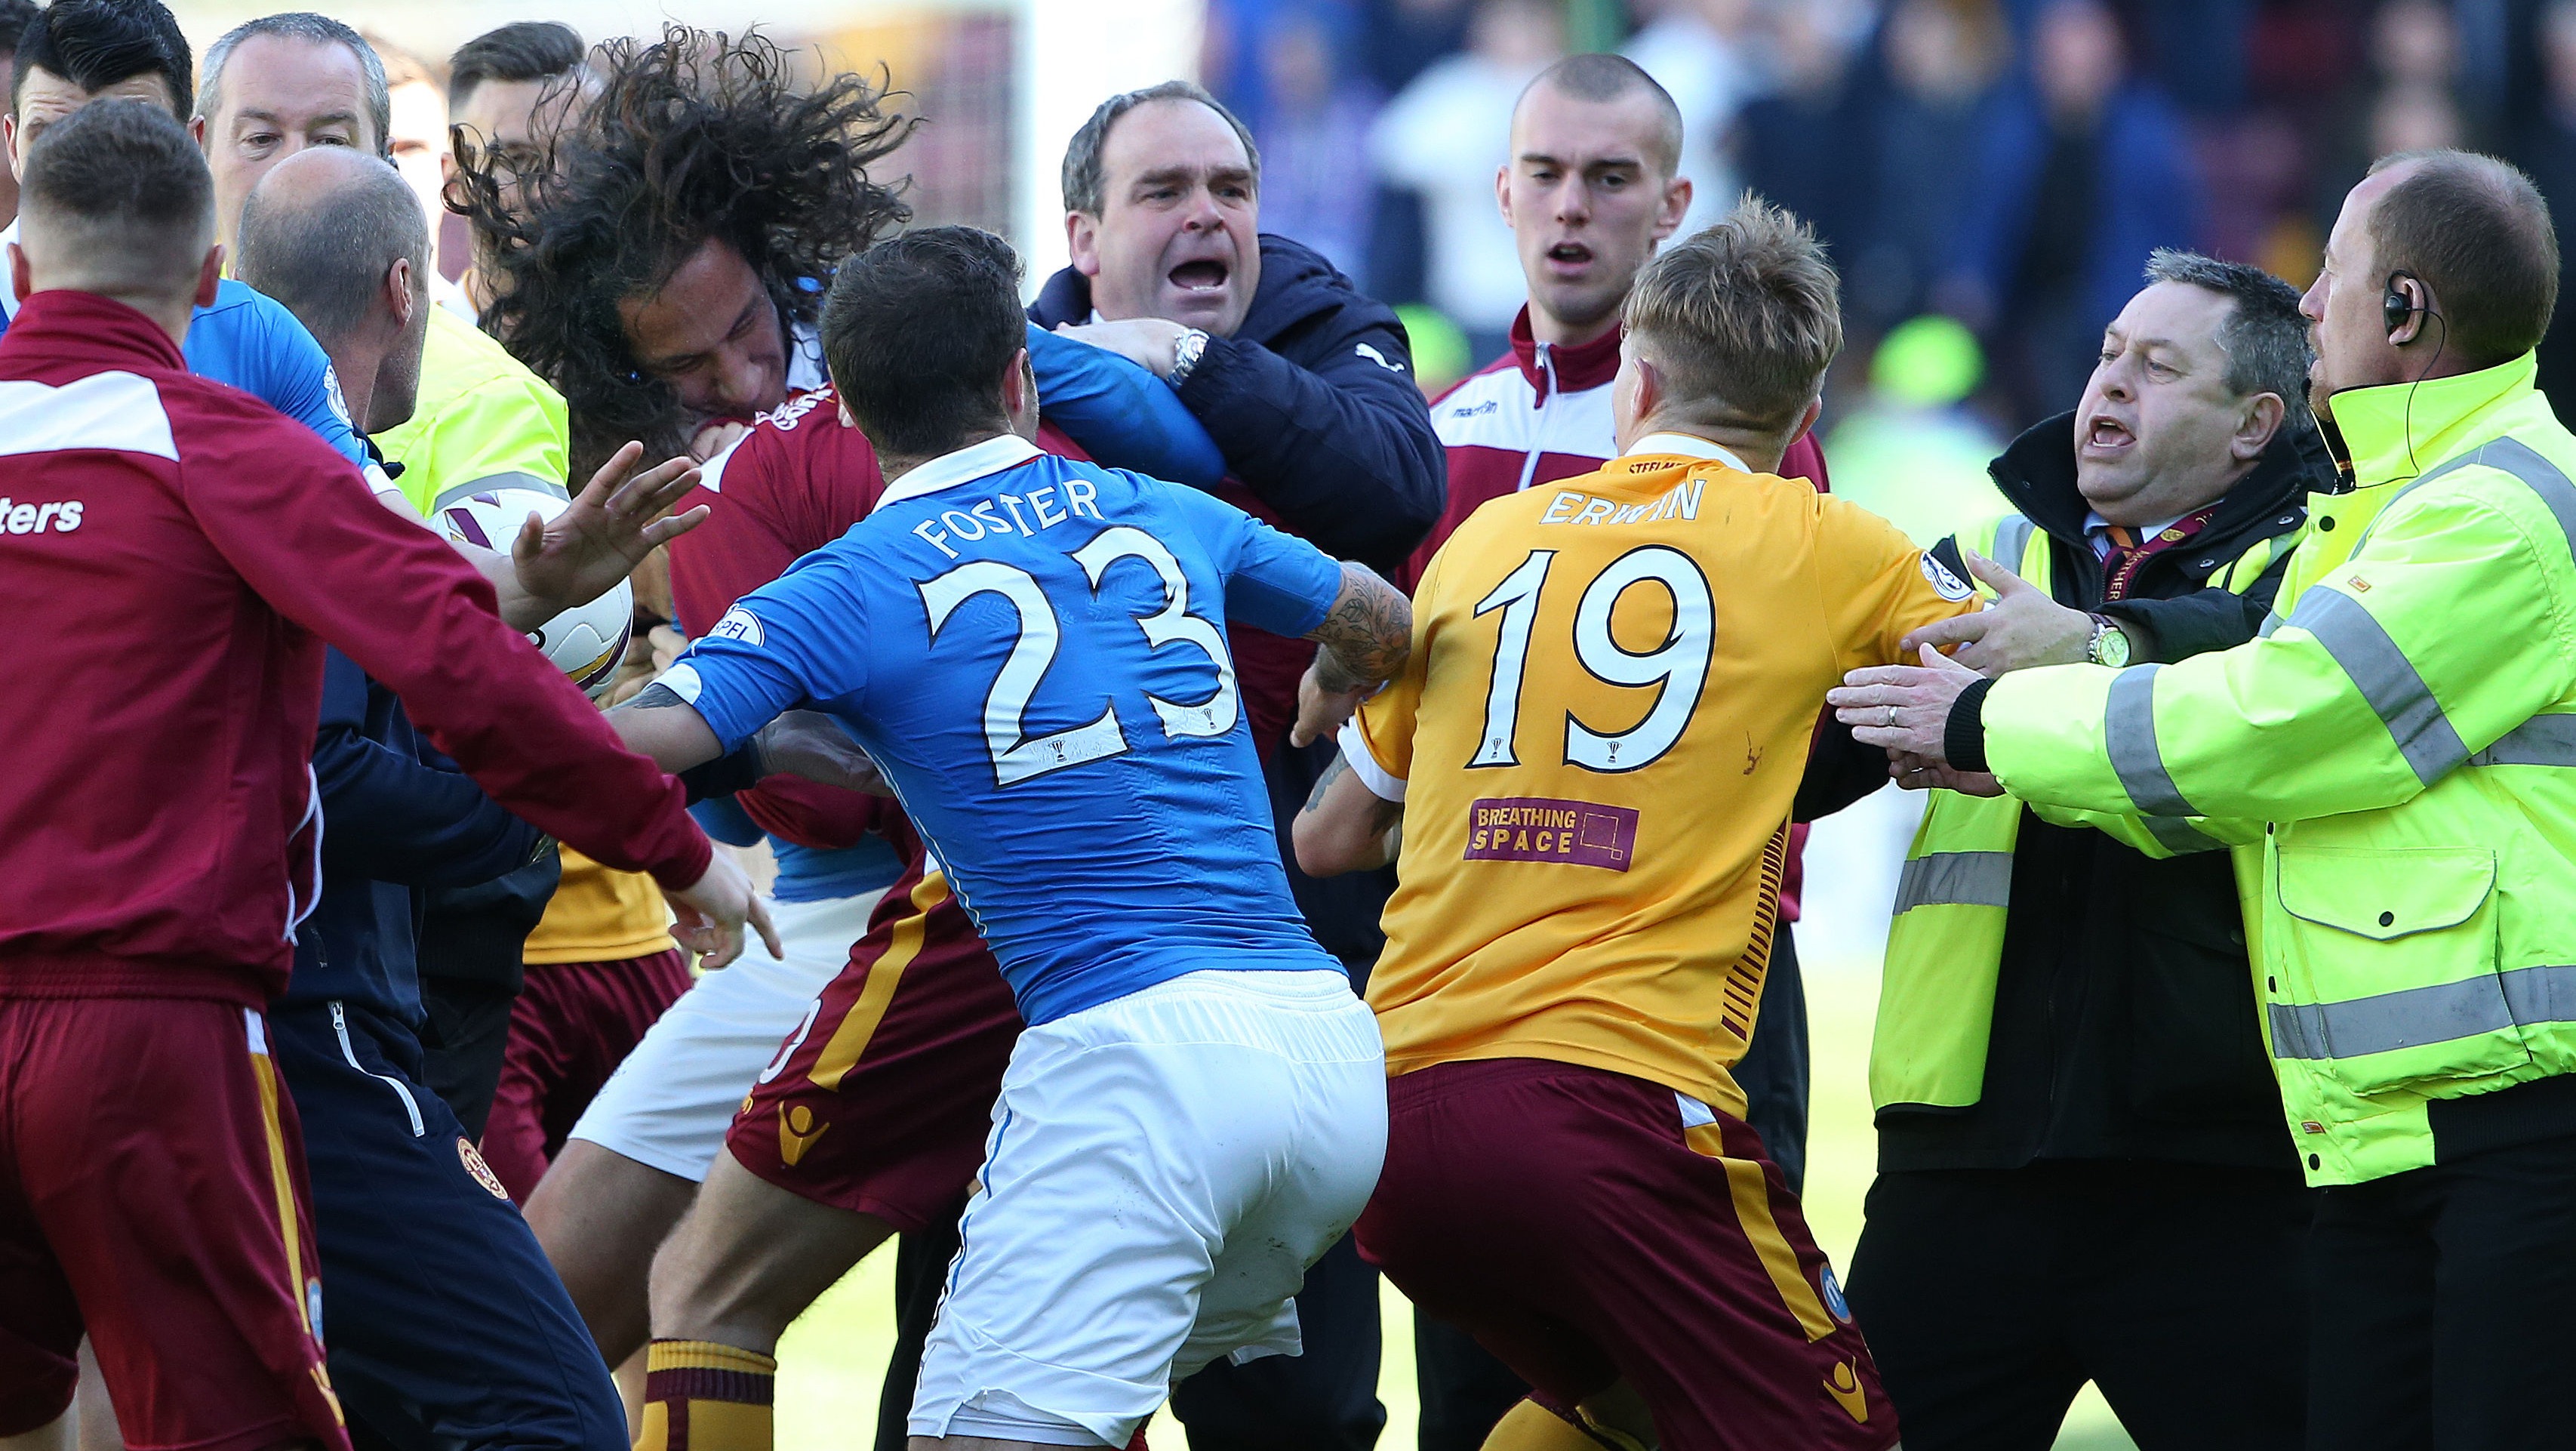 Police investigate players brawl in Motherwell v Rangers play-off final ITV News